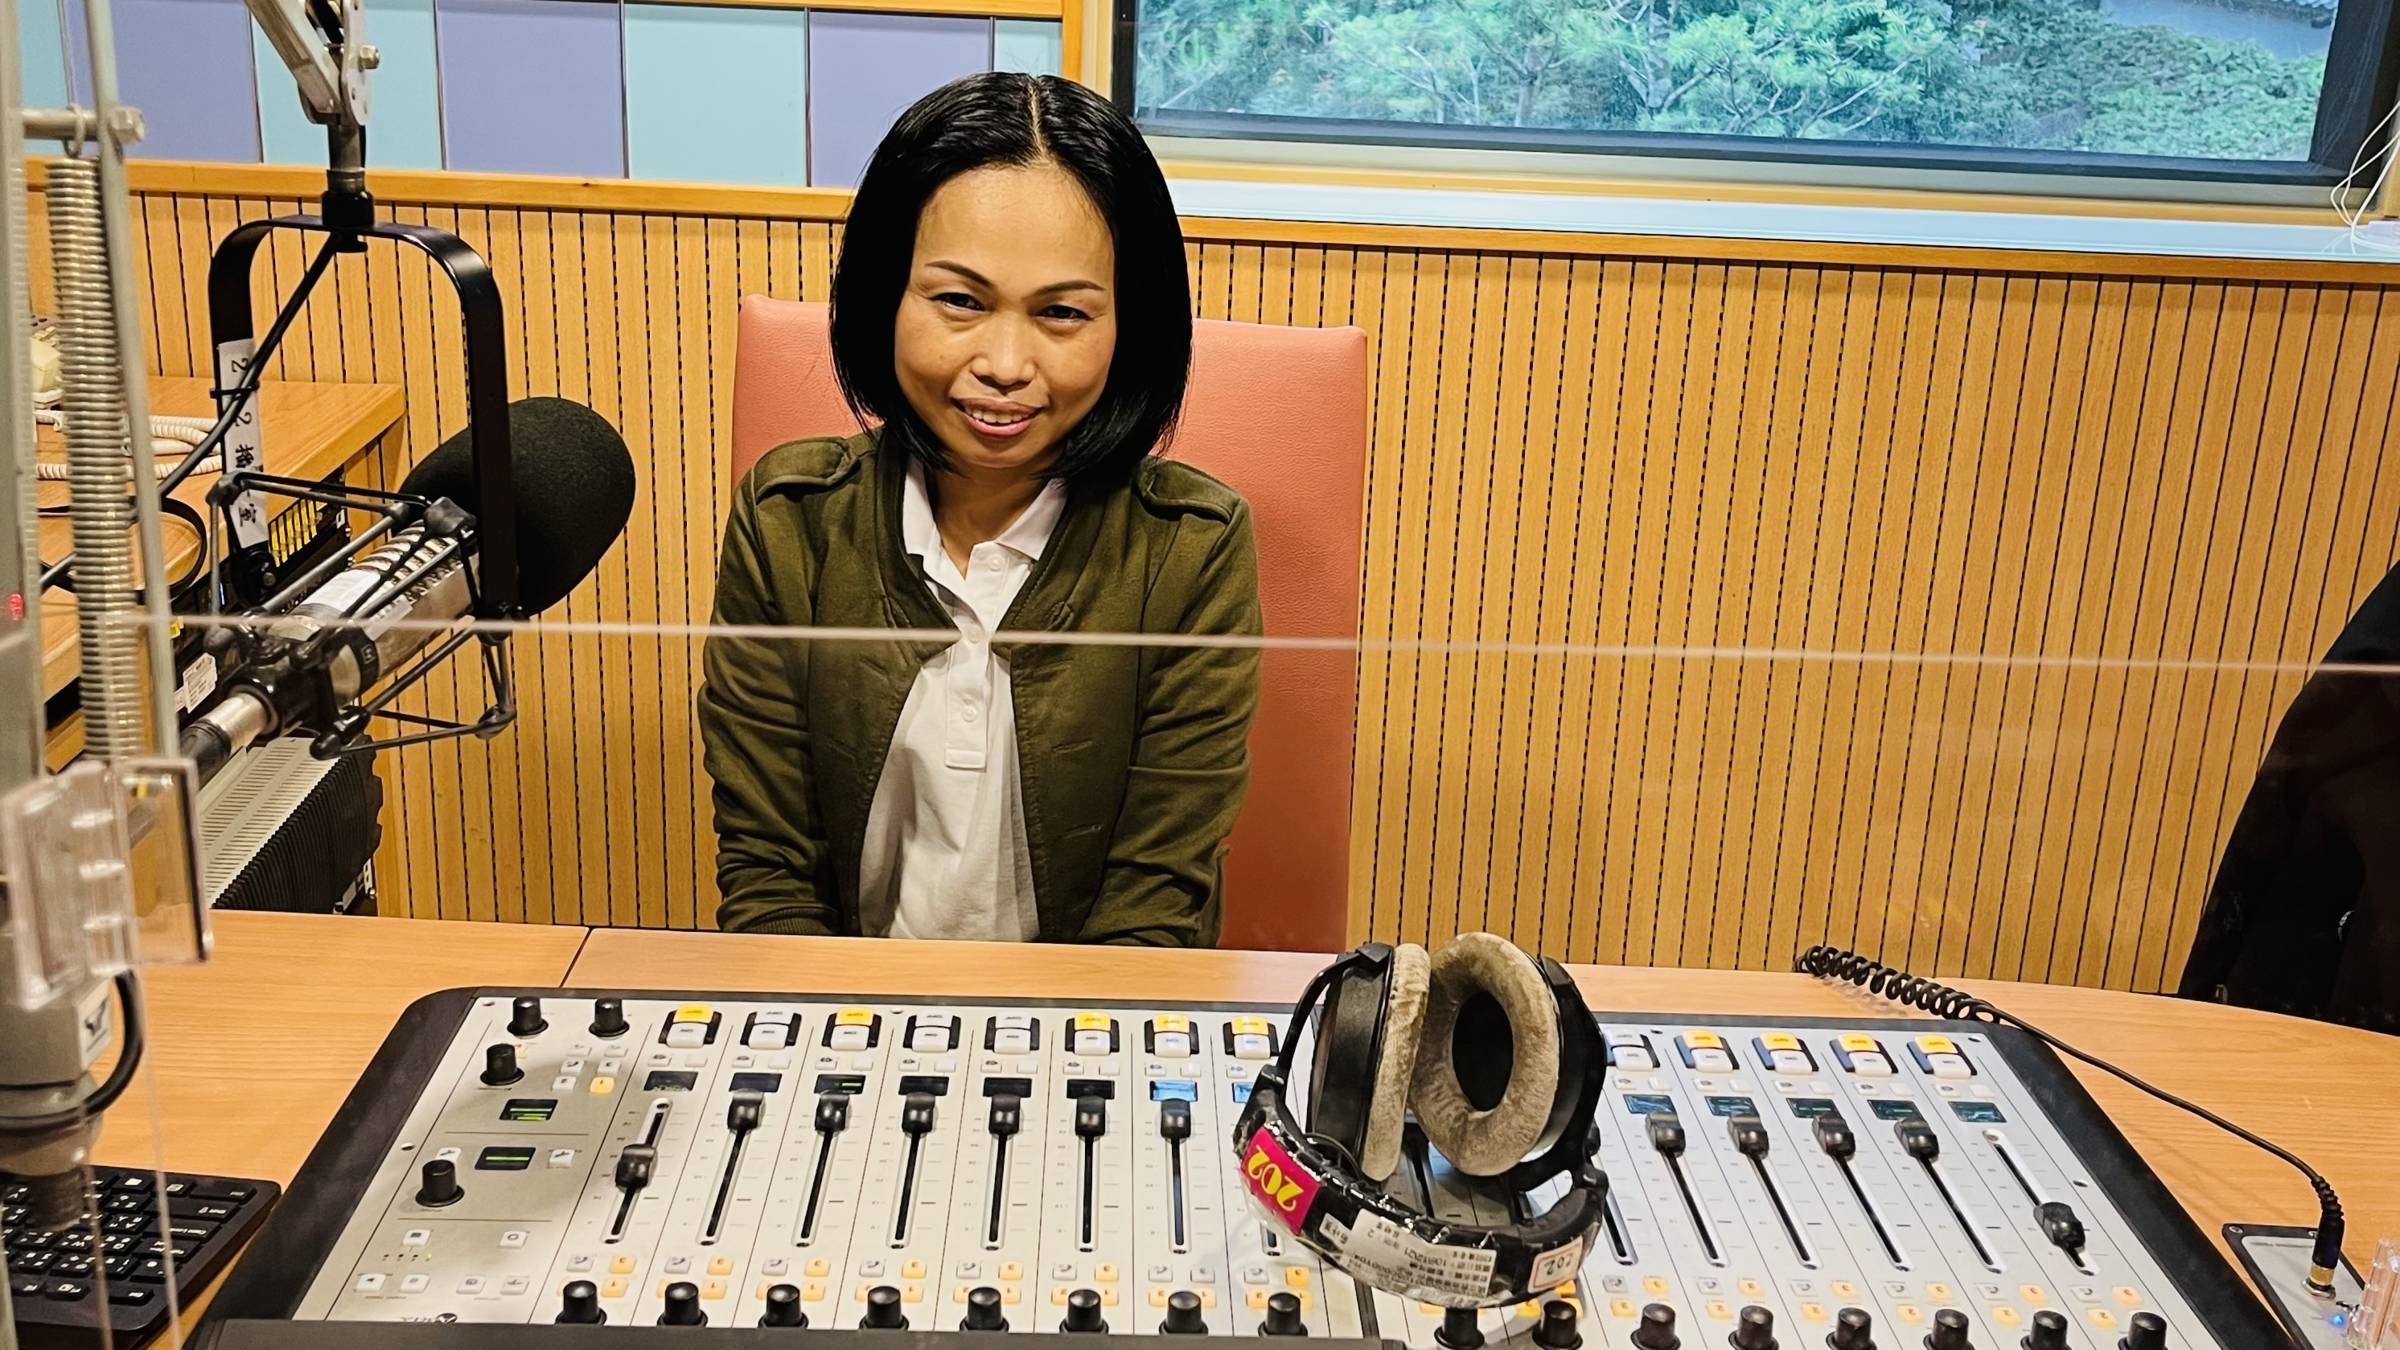 Lin Xiu Wen from Northern Thailand shared her story of working in Taiwan after her house in Thailand was mortgaged. (Photo / Provided by the National Education Radio)